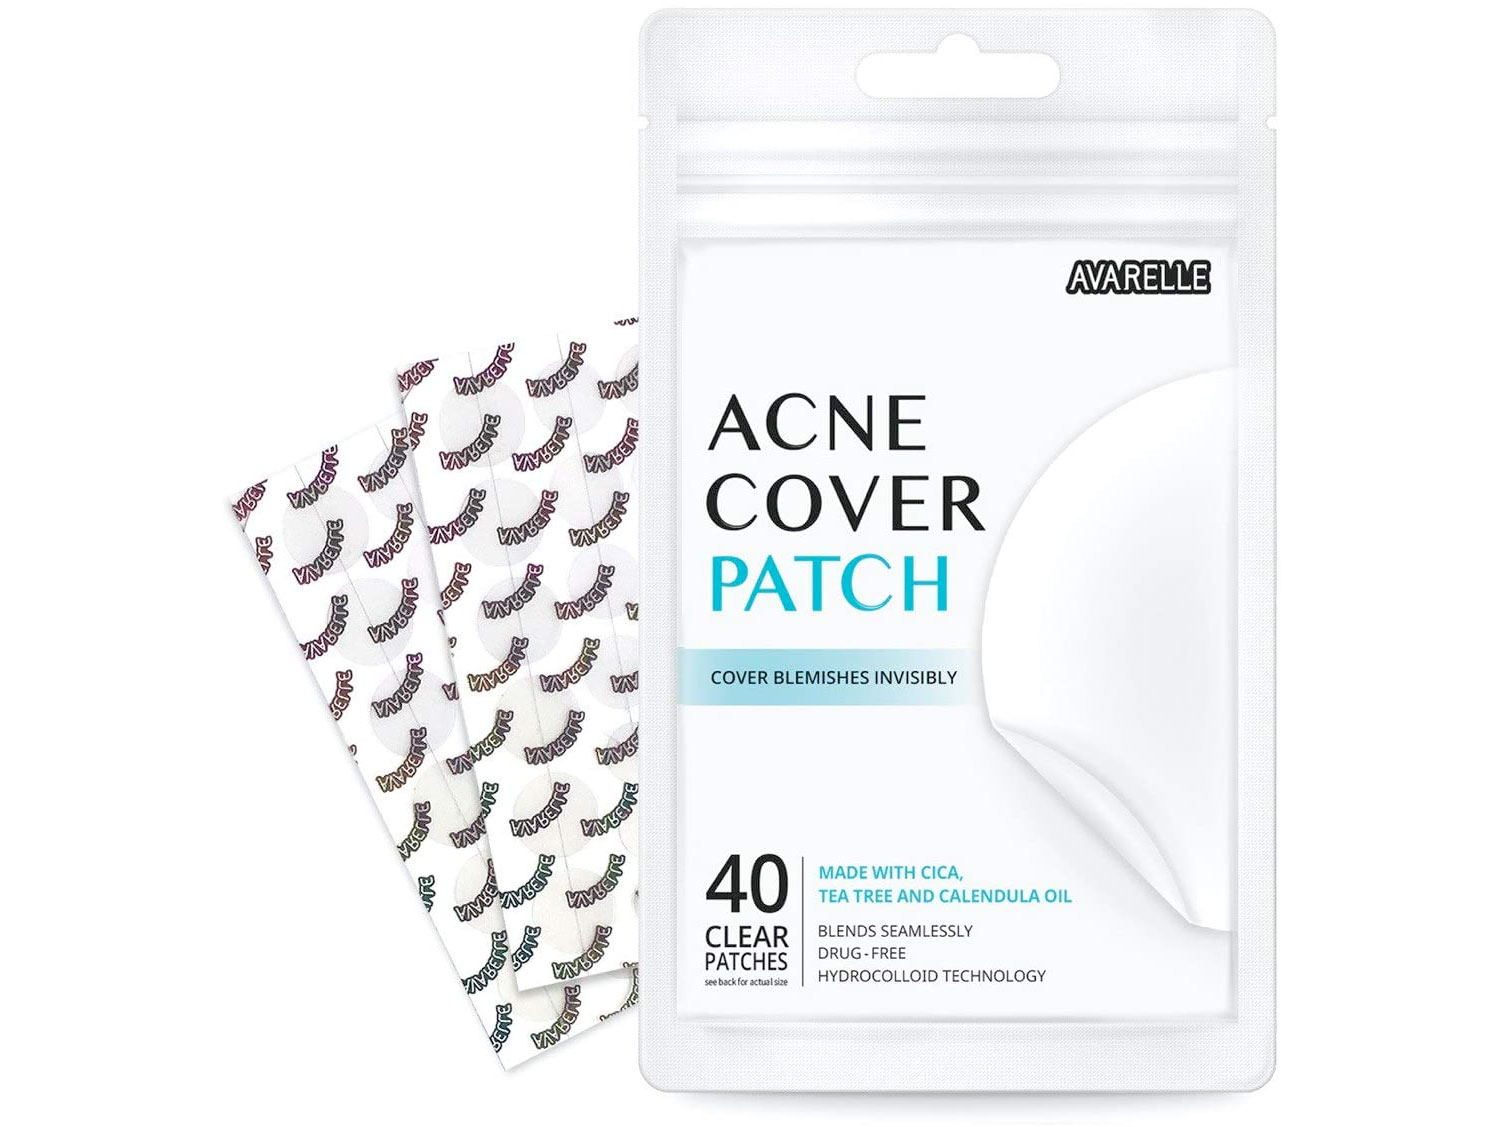 Amazon：Hydrocolloid Pimple Patch Absorbing Cover With Tea Tree & Calendula Oil (40 Count)只卖$10.16